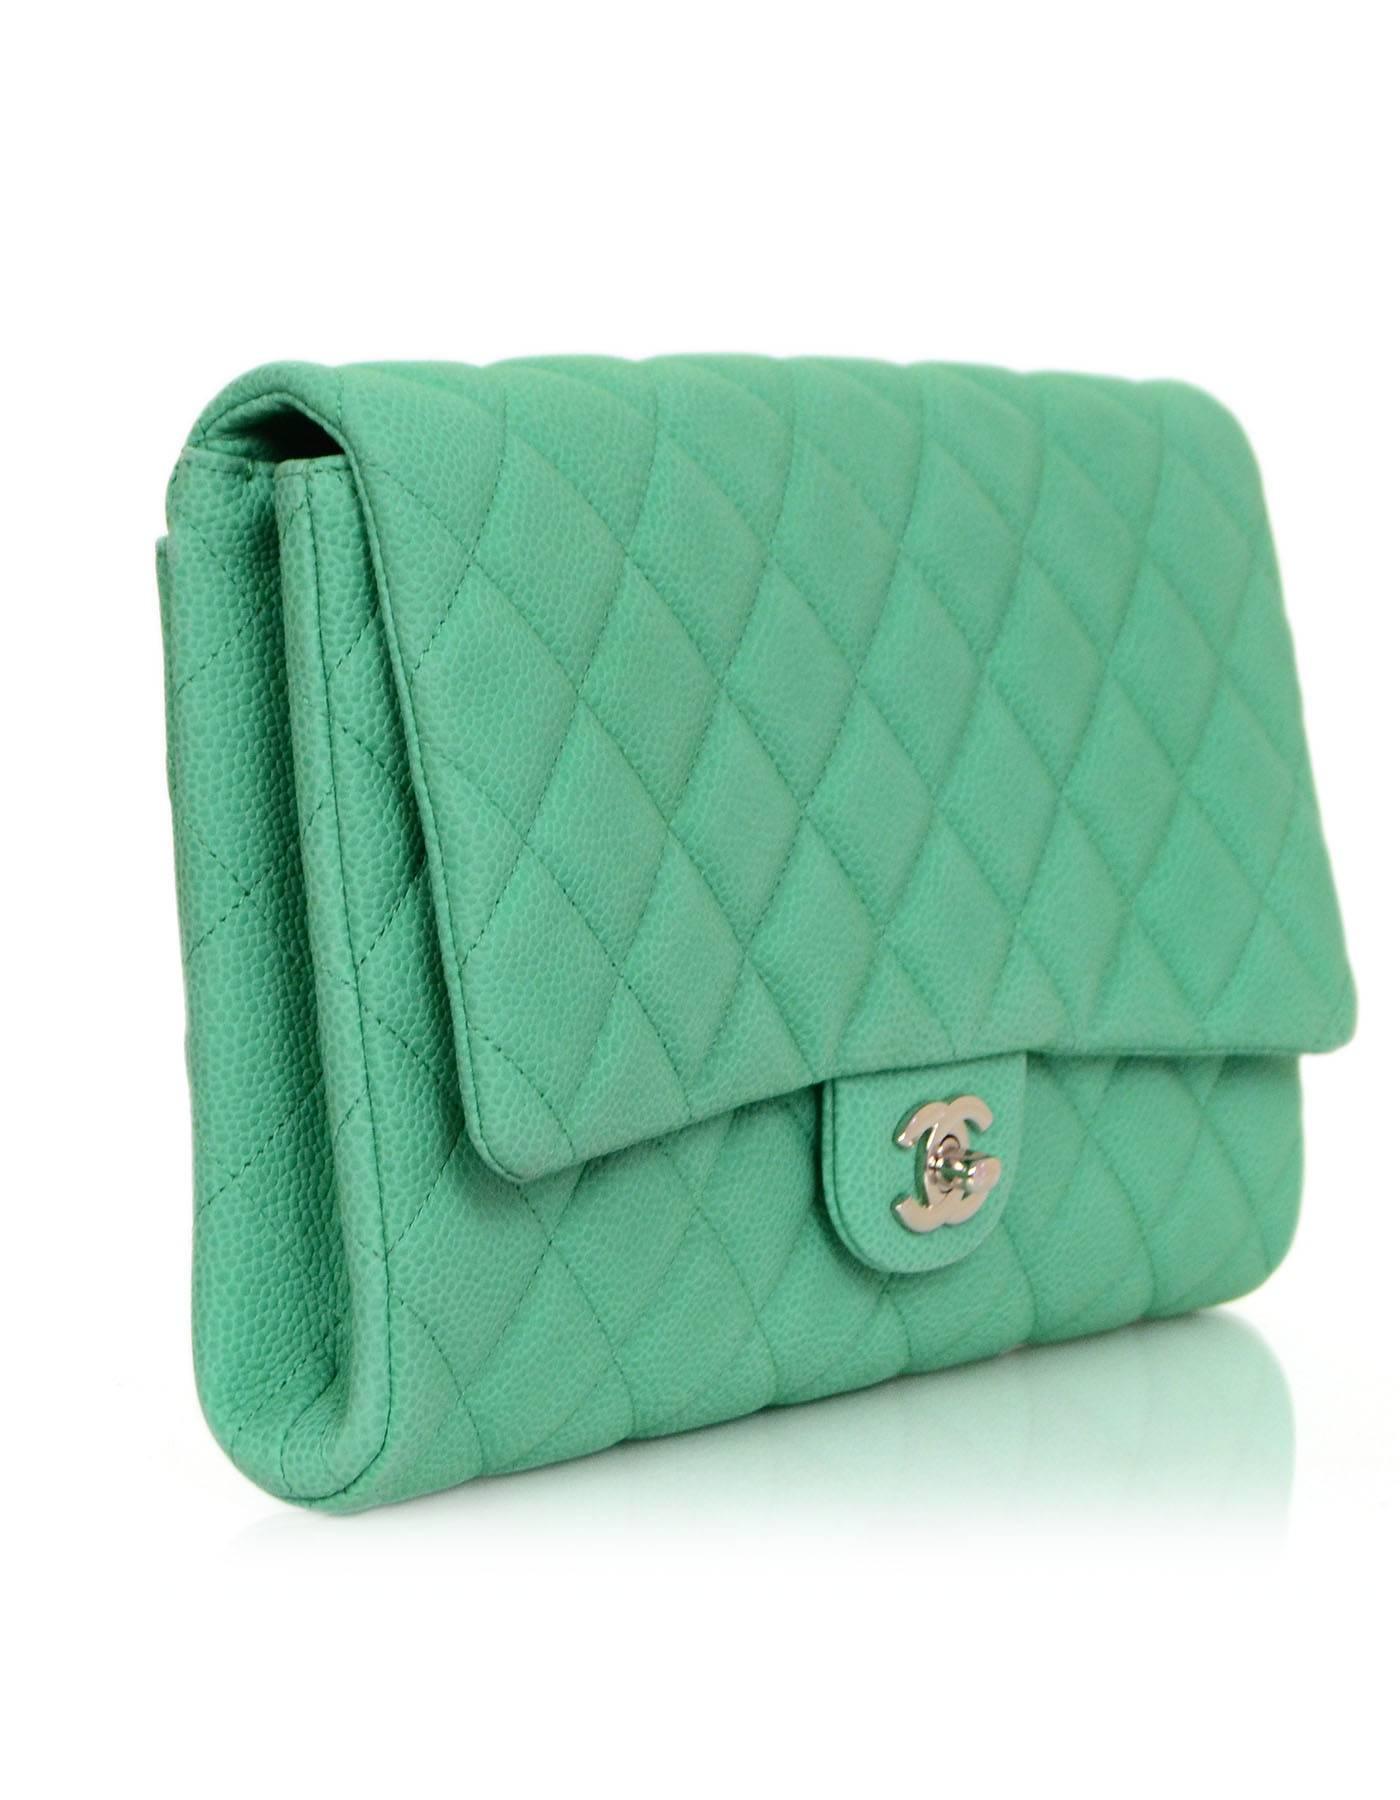 chanel timeless clutch discontinued